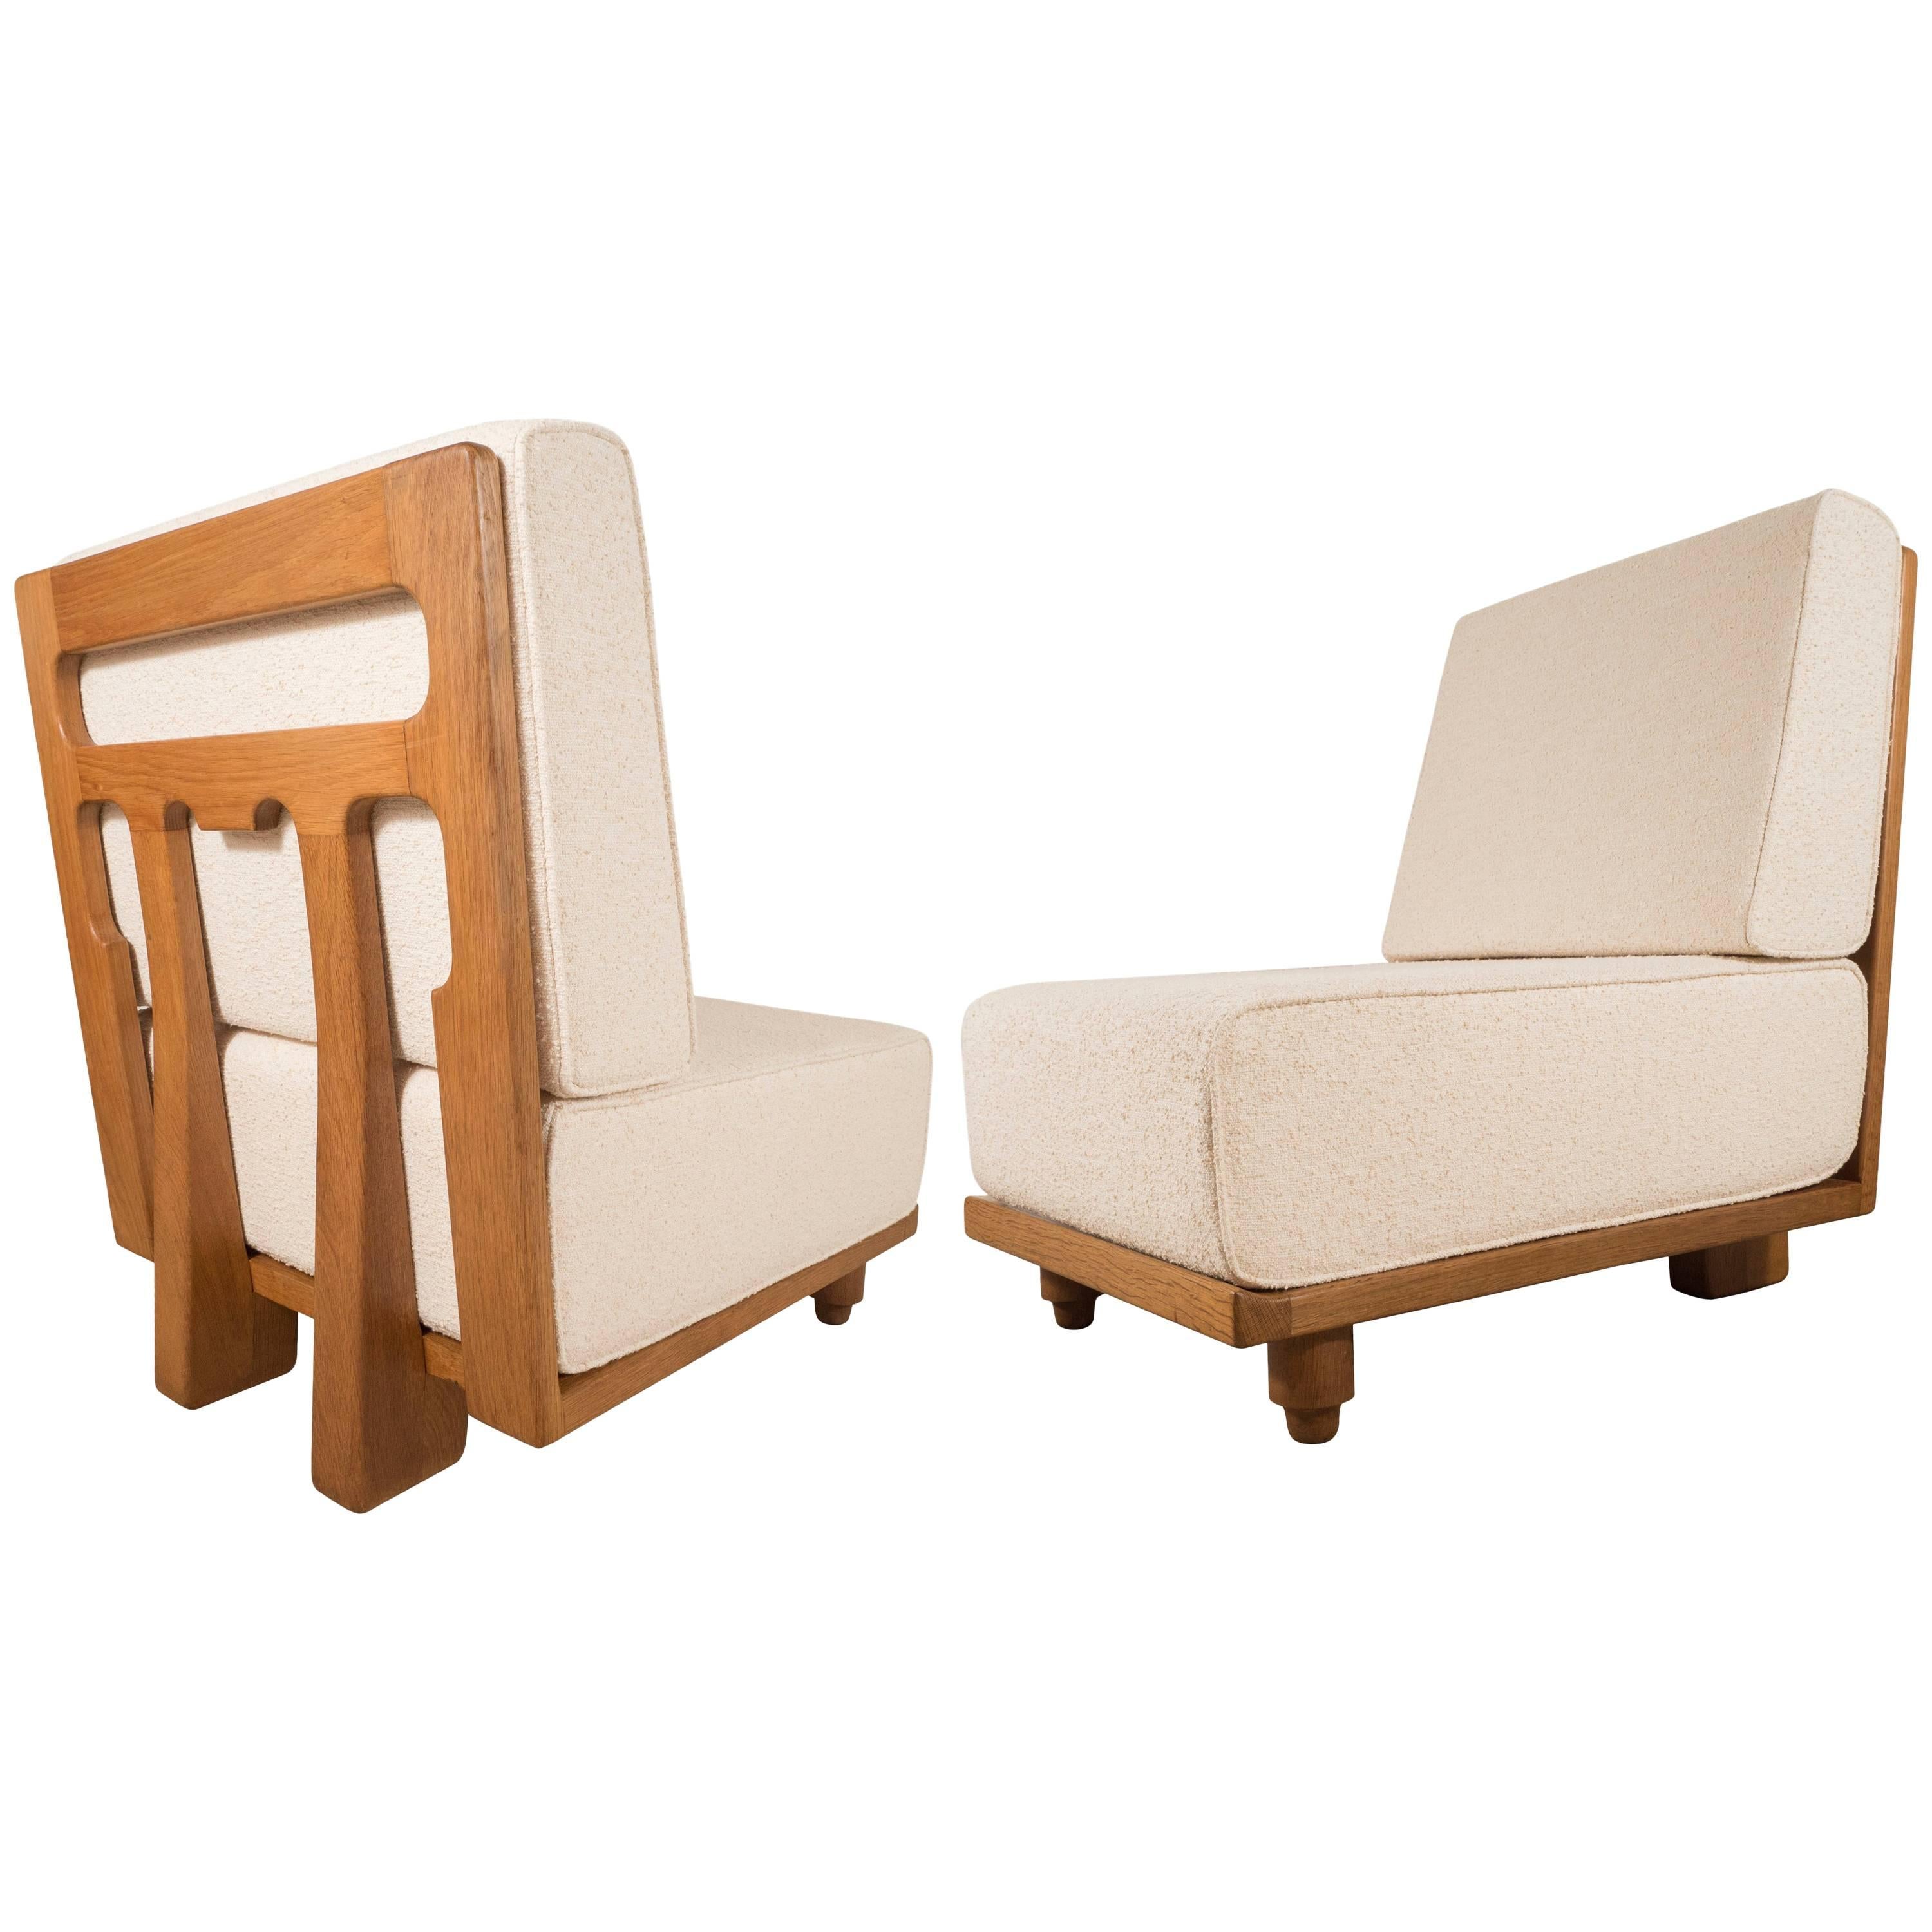 Pair of Slipper Chairs by Guillerme & Chambron, France, circa 1950